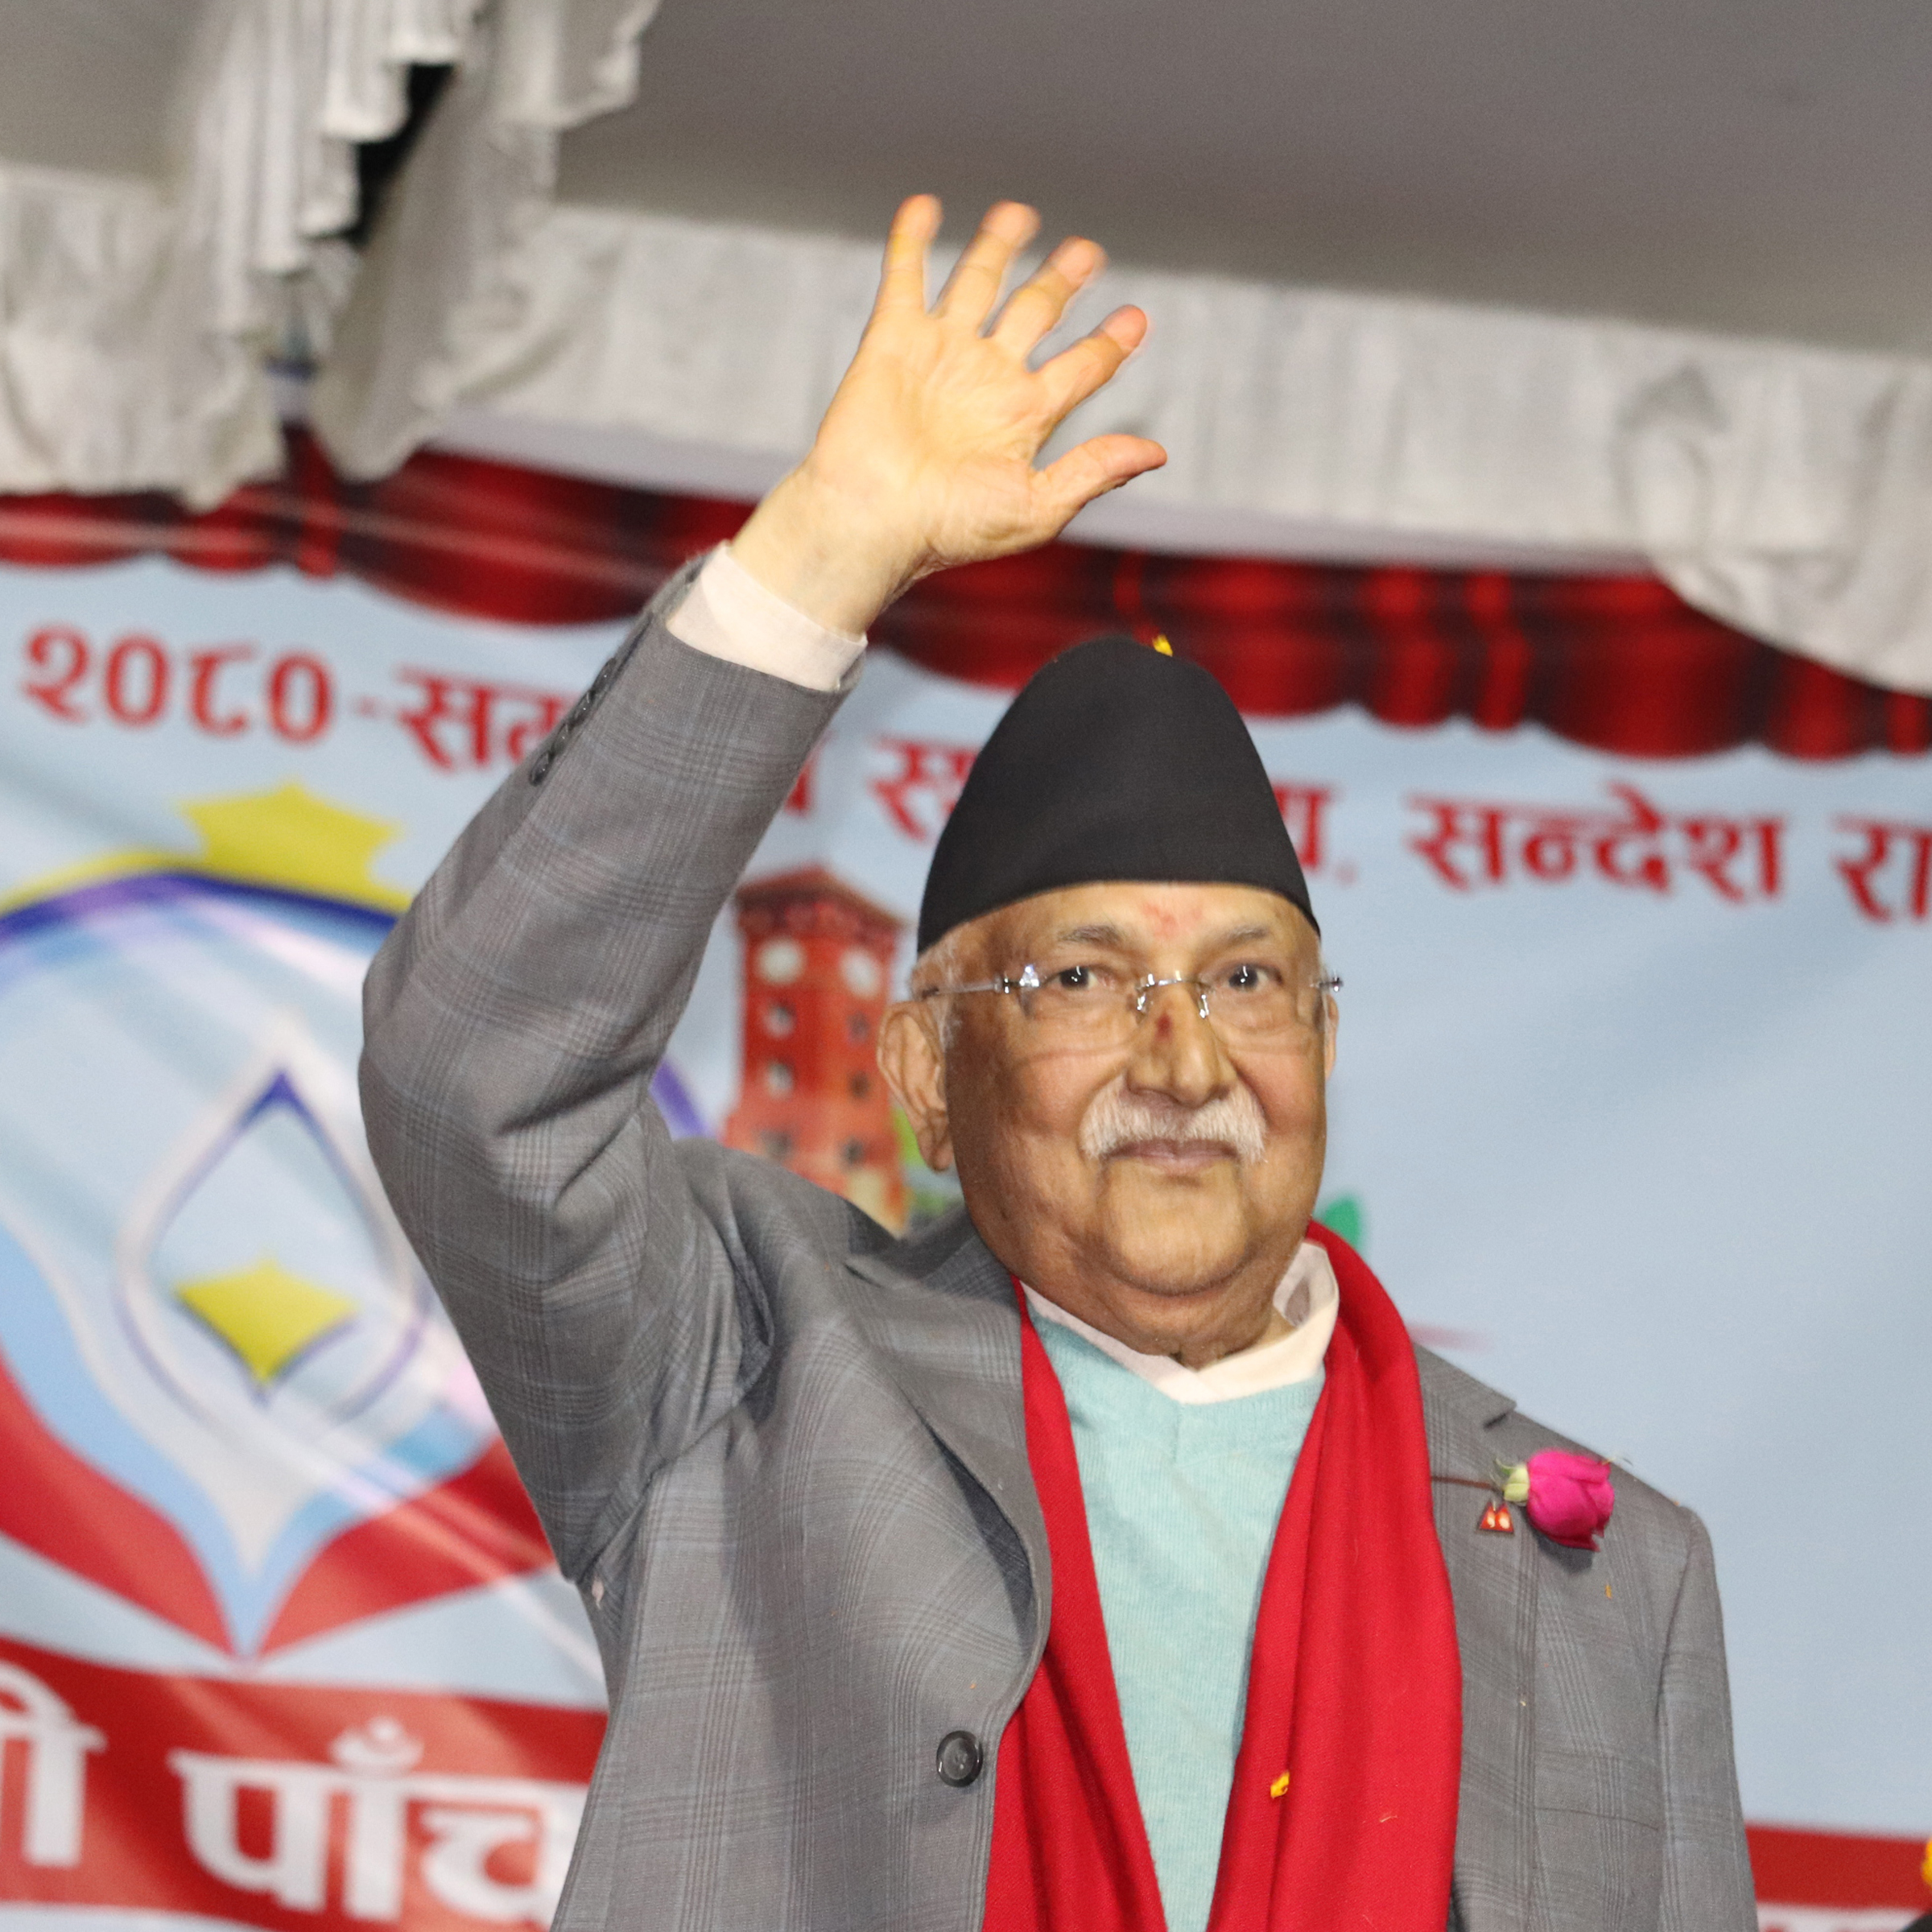 UML’s Mid-Hill East-West Campaign reaches Phidim today, identity-centric groups call for shutdown